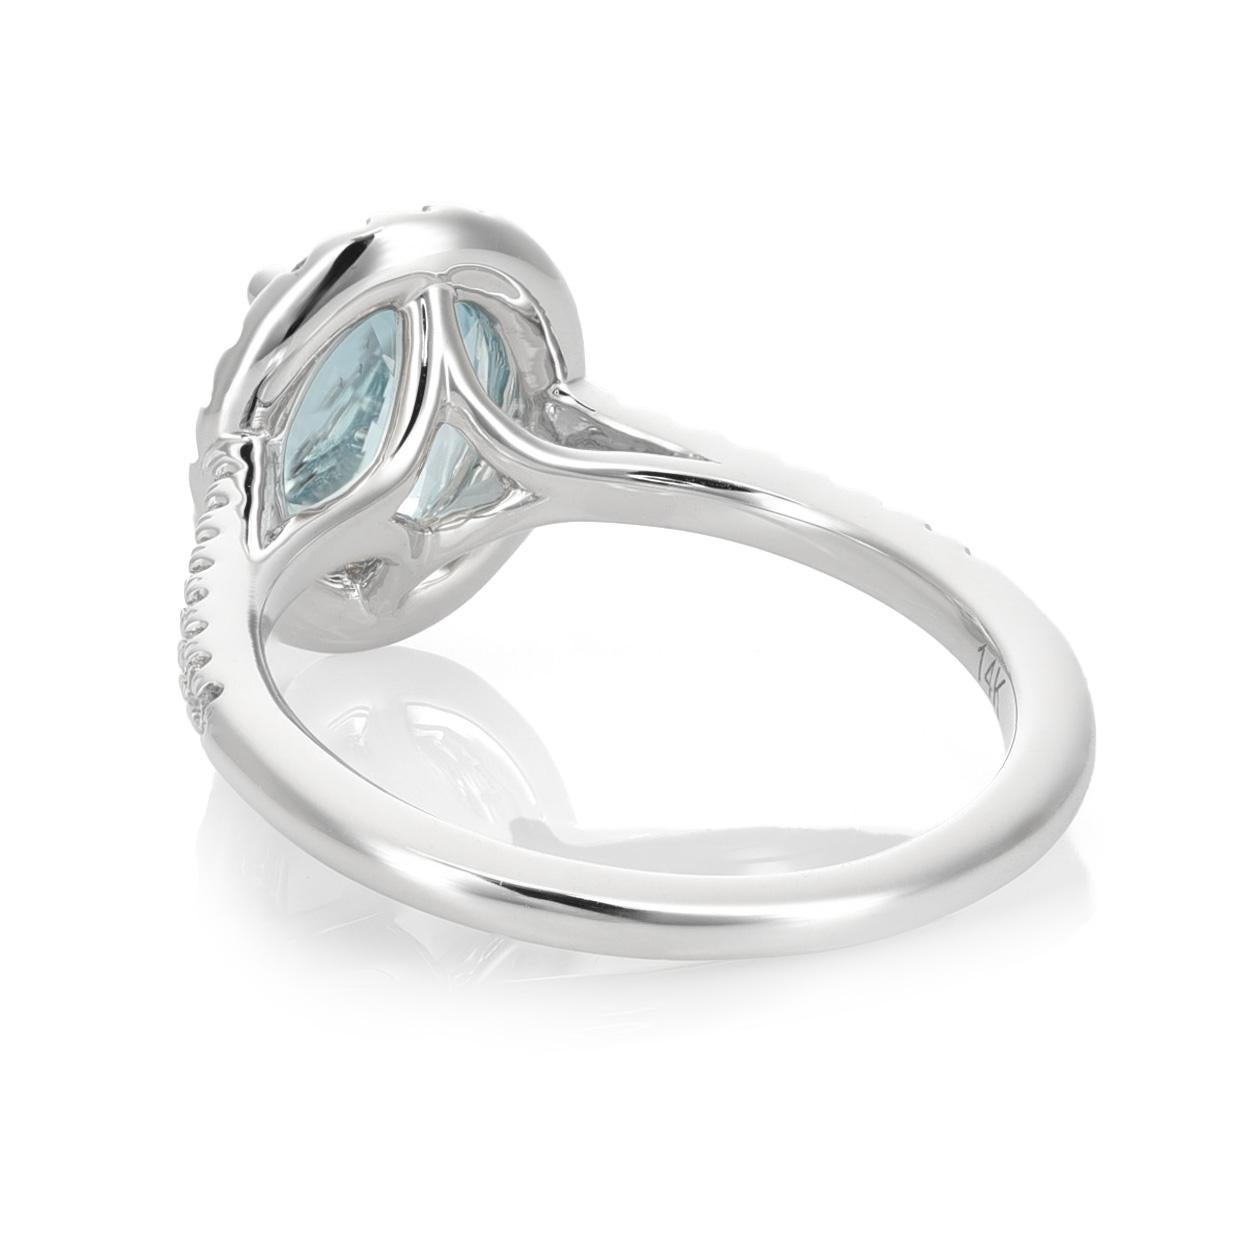 Mixed Cut 1.56 Carats Natural Aquamarine Diamonds set in 14K White Gold Ring For Sale